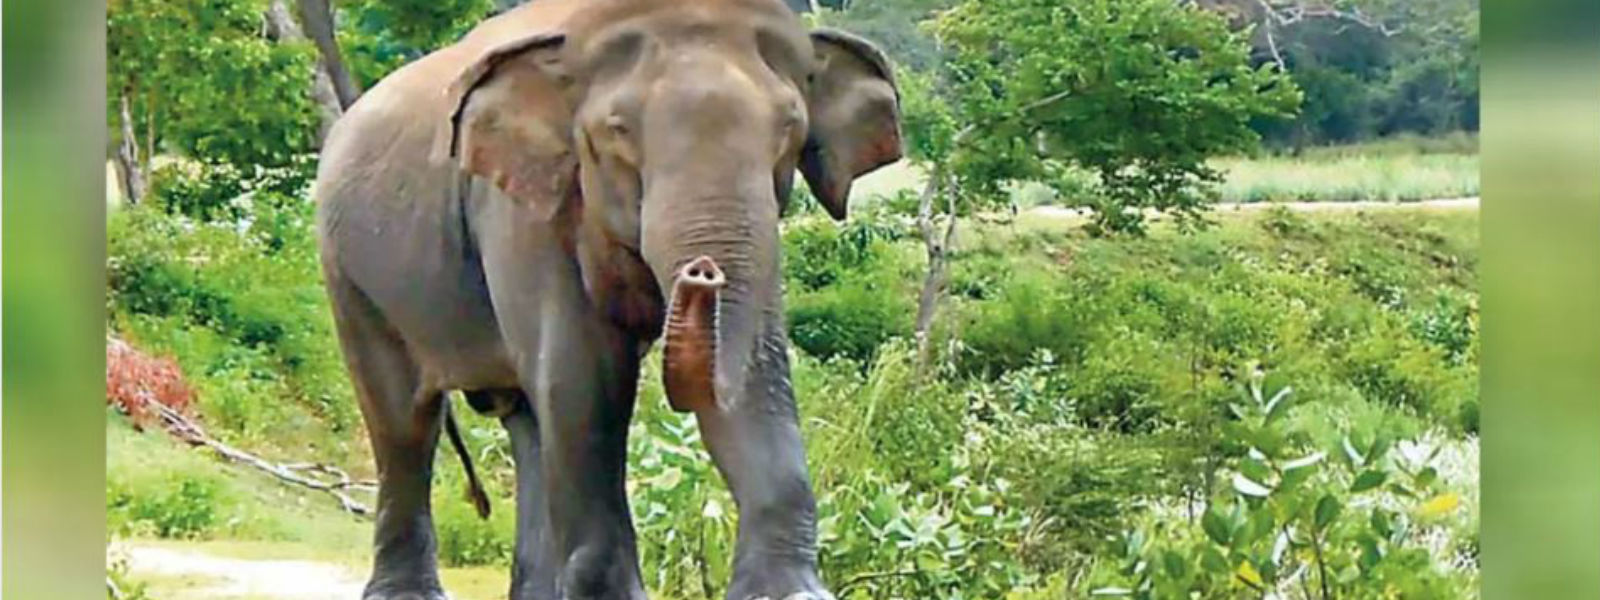 Pallekagama continues to suffer elephant invasions